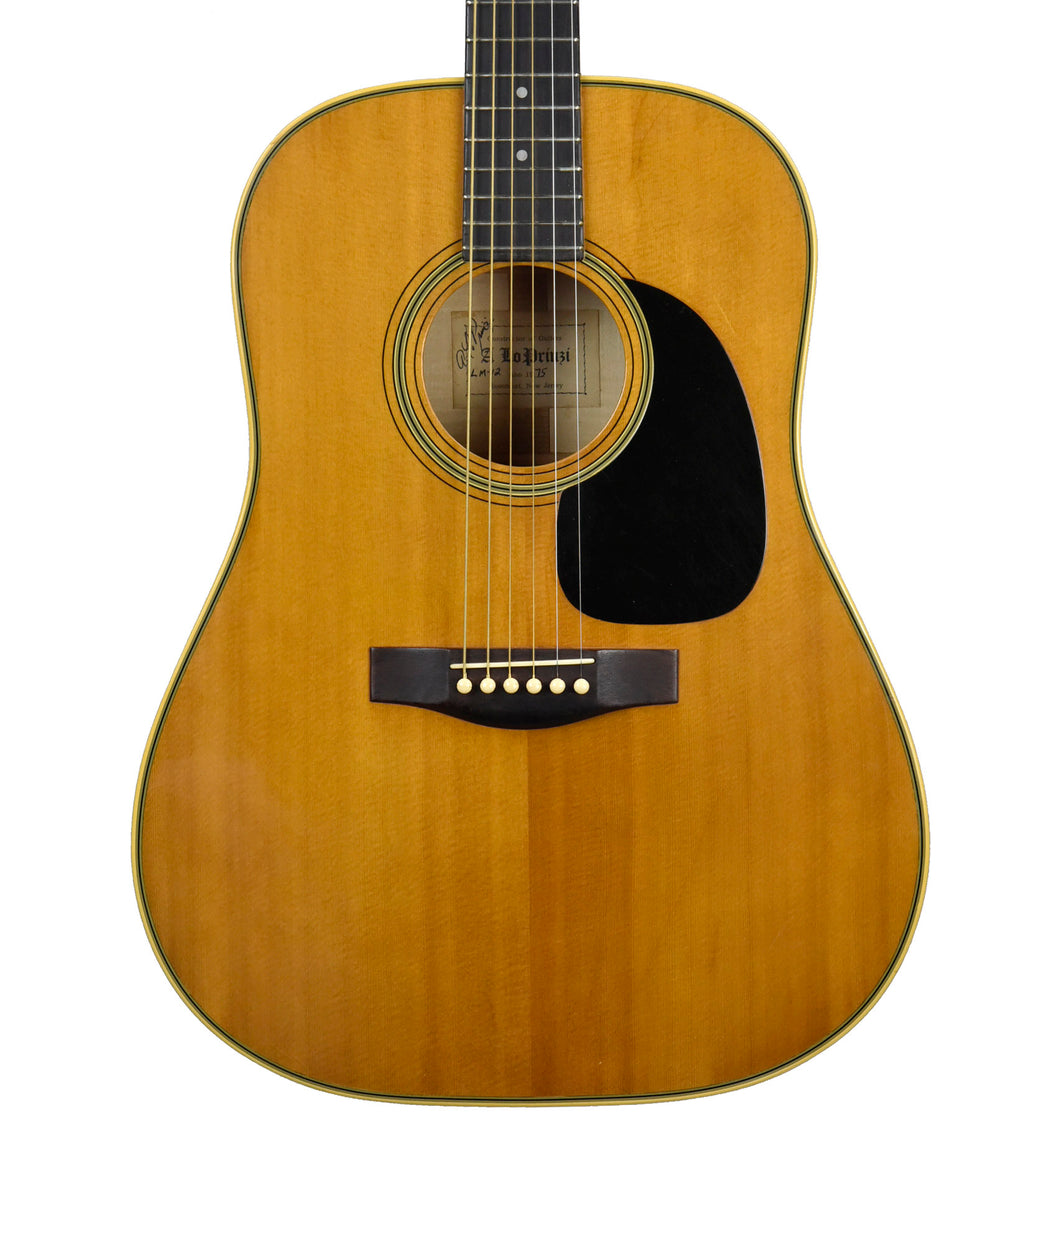 Used 1975 Augustino LoPrinzi LM12 Acoustic Guitar in Natural 3099 - The Music Gallery